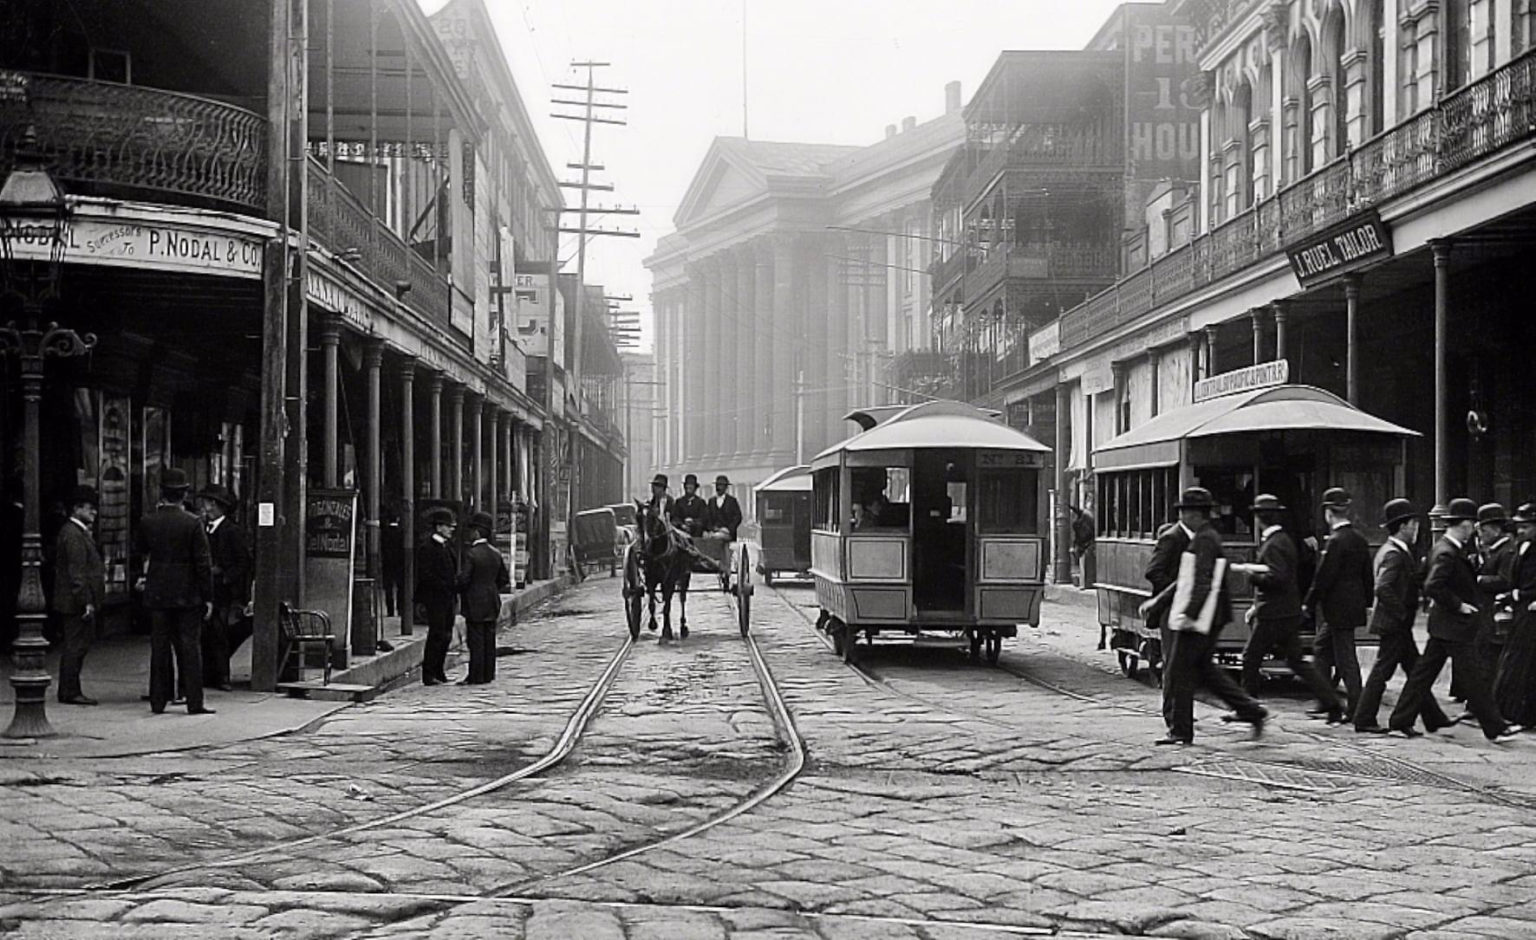 St. Charles Avenue at junction with Canal Street, between 1880 and 1897, showing a green and crimson “Perley Thomas” streetcar